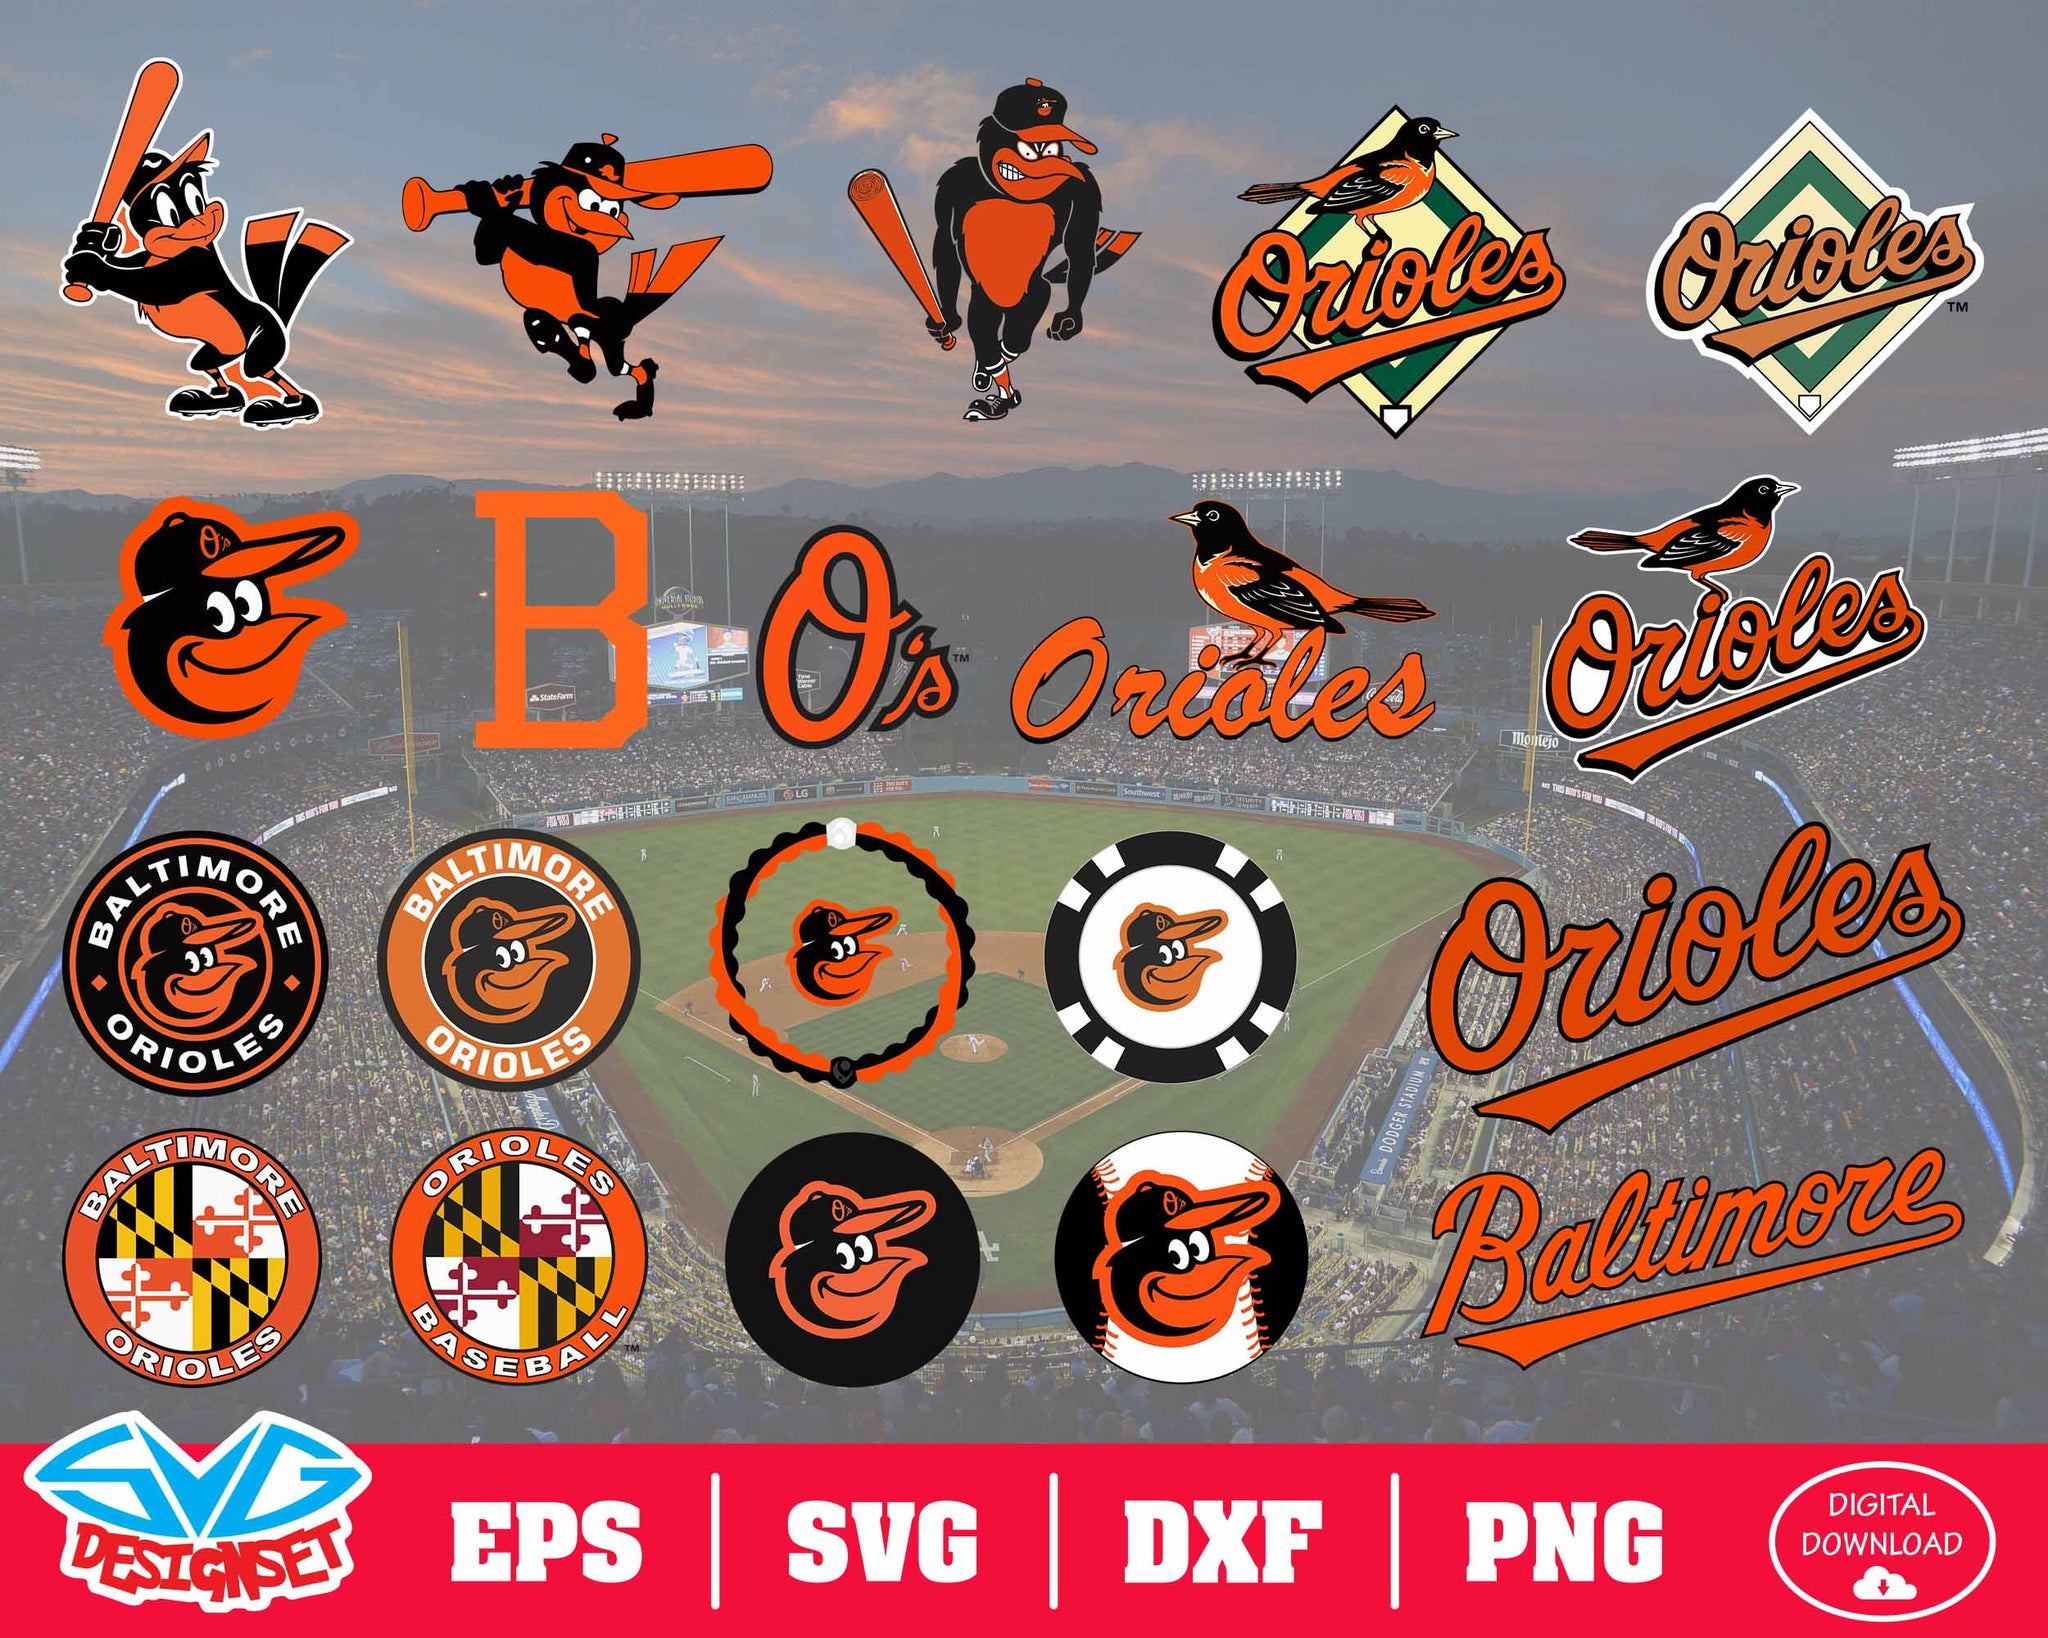 Baltimore Orioles Team Svg, Dxf, Eps, Png, Clipart, Silhouette and Cutfiles - SVGDesignSets